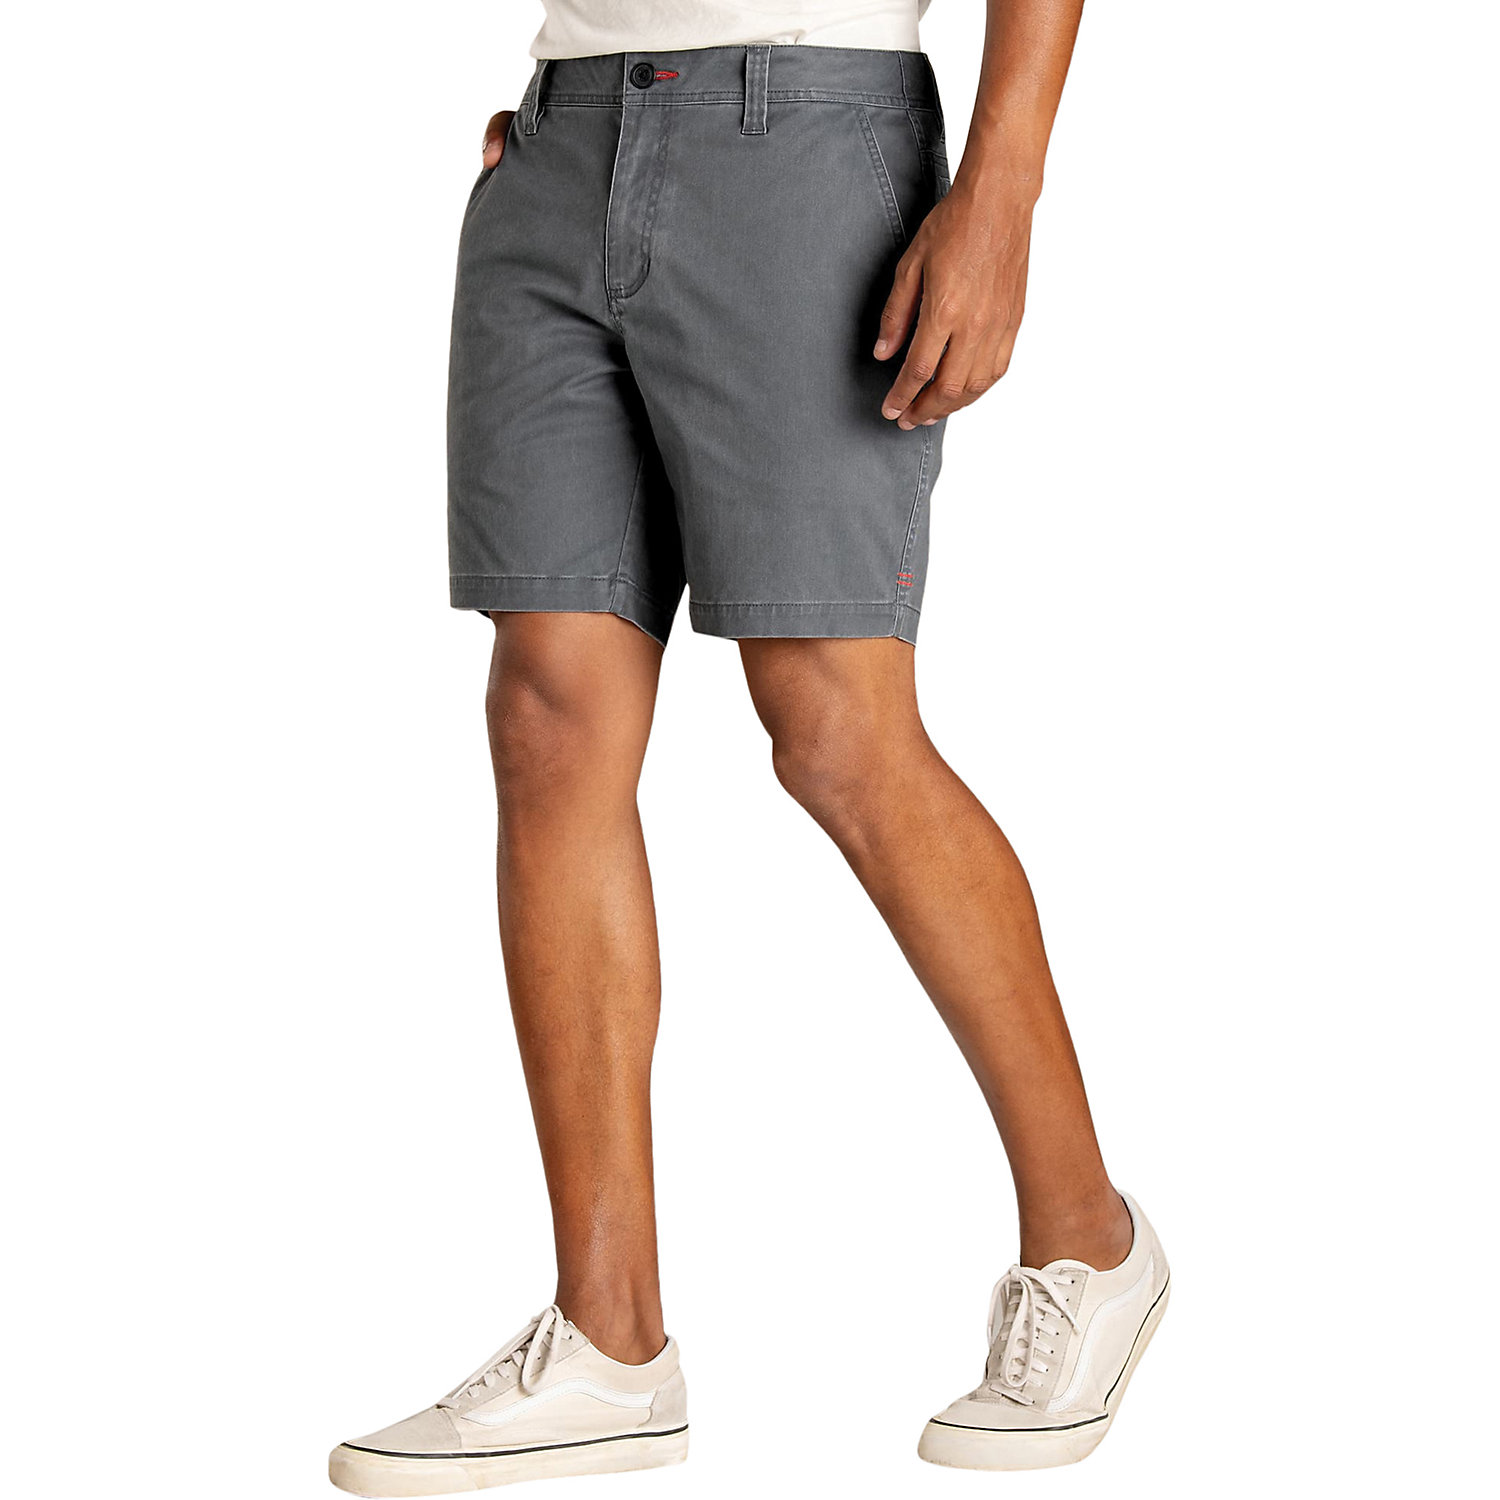 Toad & Co Mens Mission Ridge 8 Inch Short